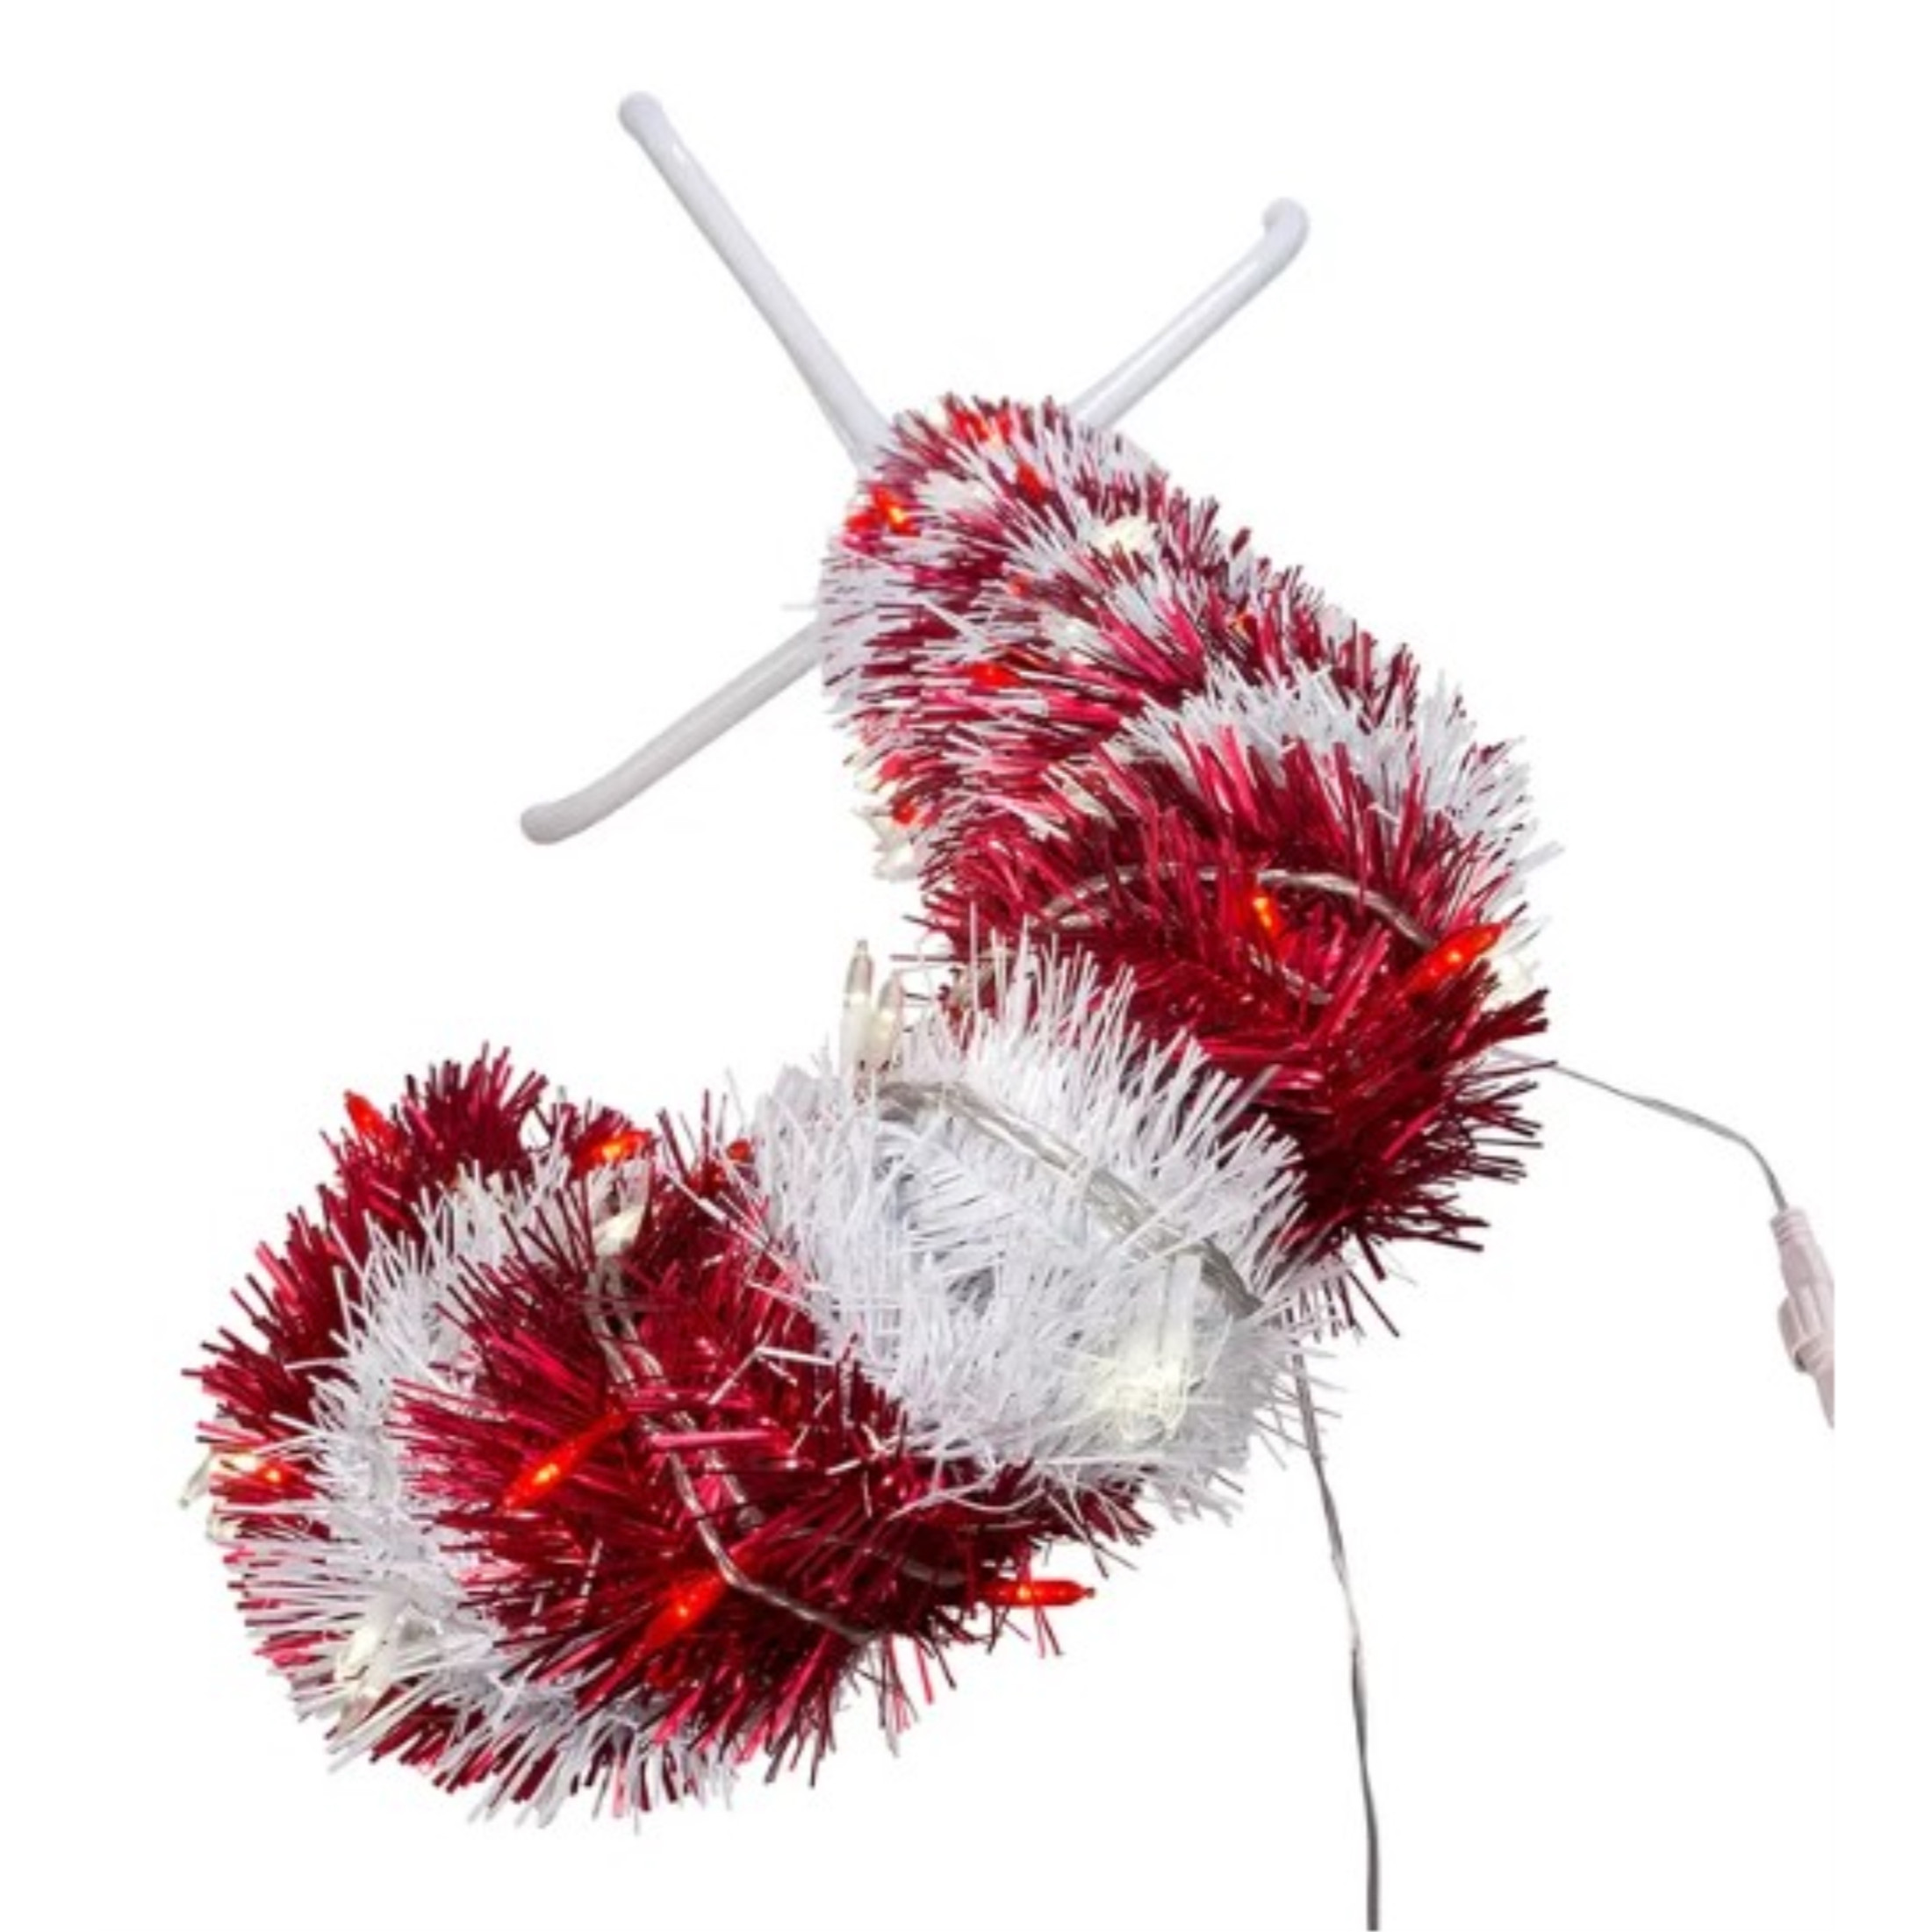 Kurt Adler Tinsel Candy Can Light Up Christmas Plastic Decoration, Red/White, 3 Feet